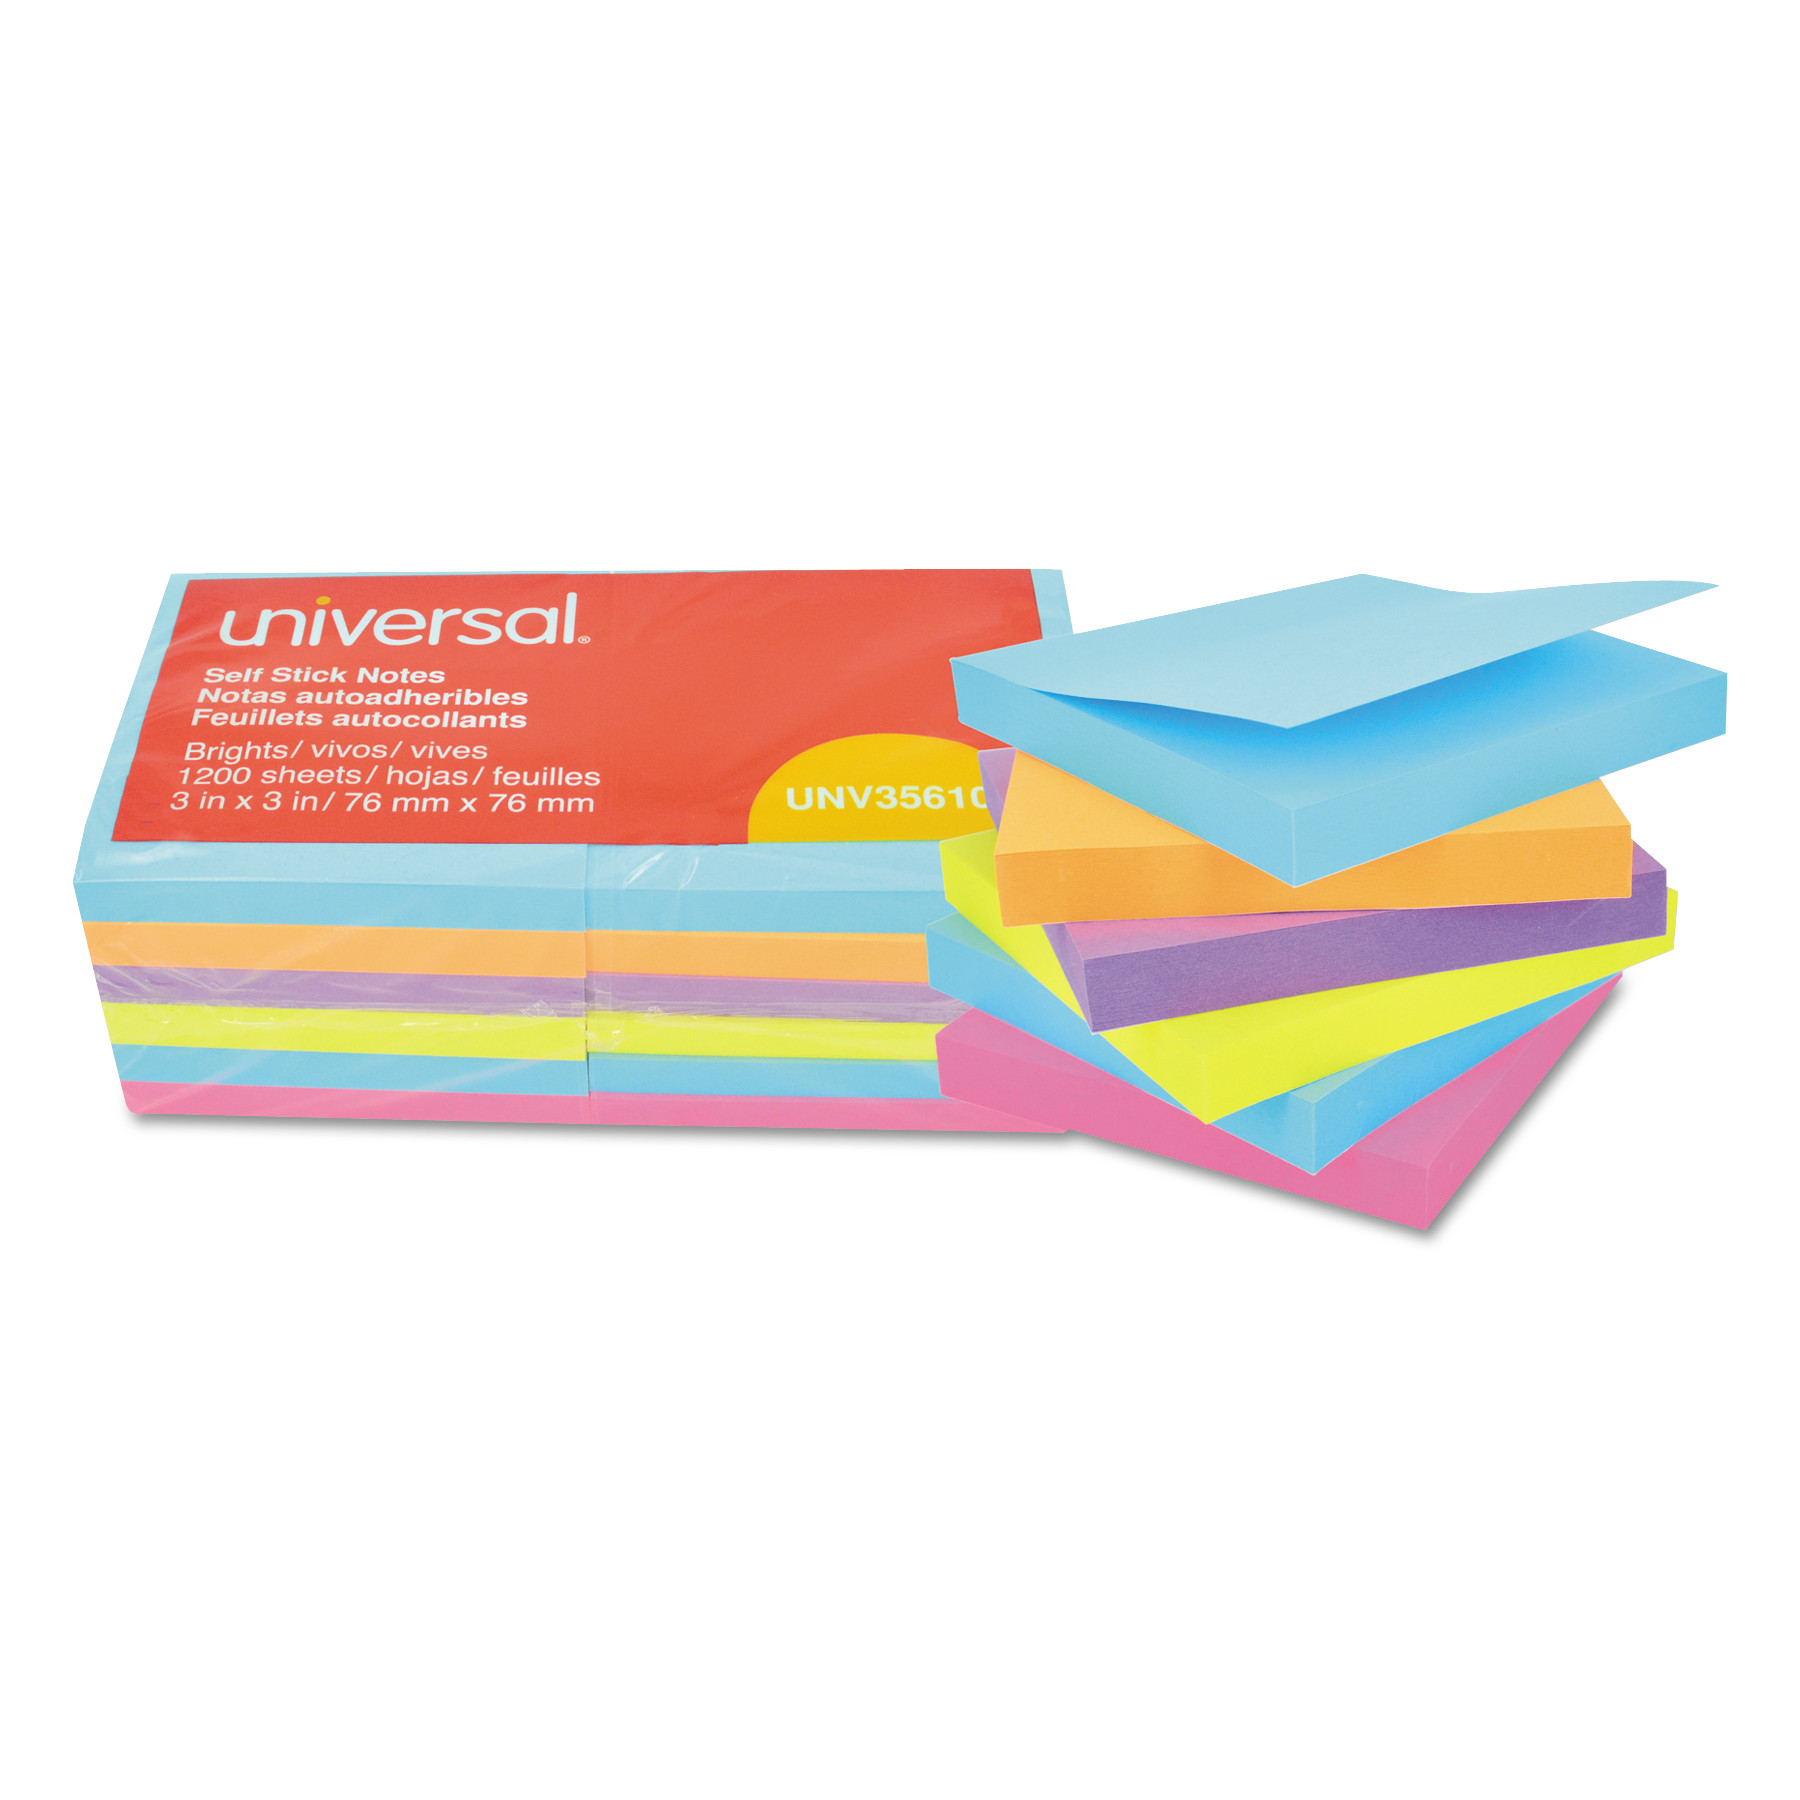  Universal UNV35610 Self-Stick Note Pads, 3 x 3, Assorted Bright Colors, 100-Sheet, 12/PK (UNV35610) 